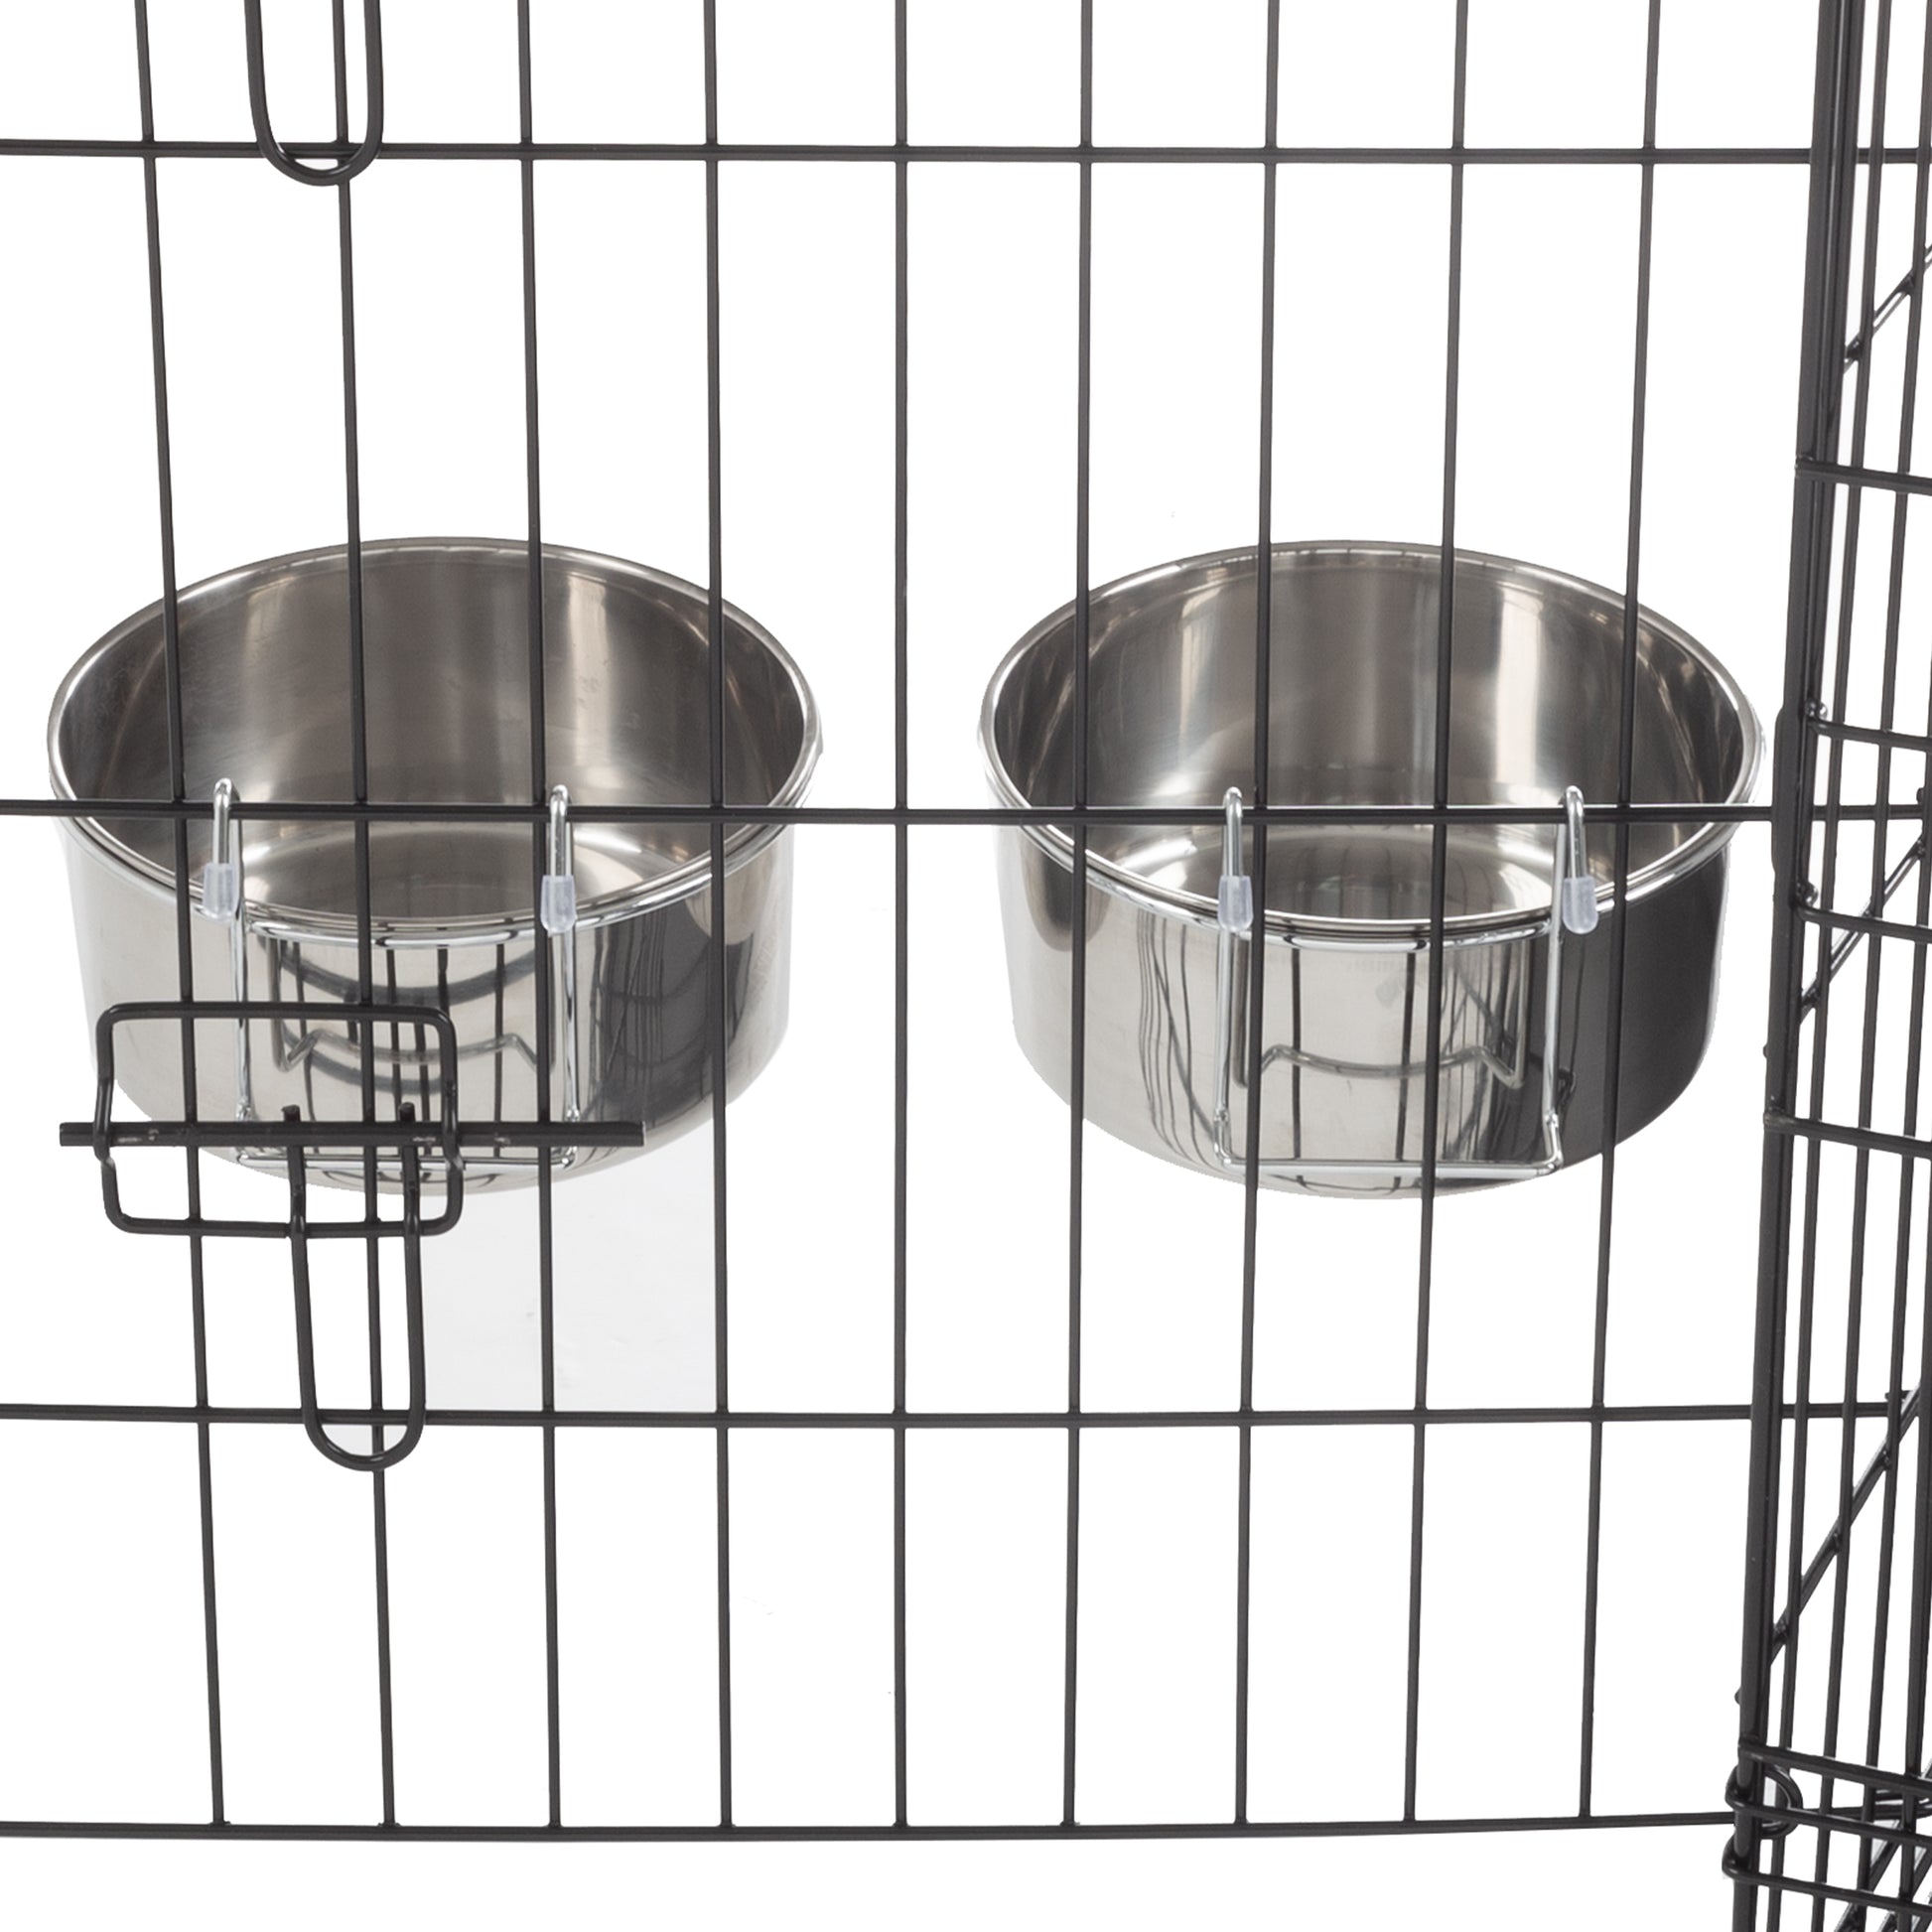 Set of 2 Stainless-Steel Dog Bowls - Cage, Kennel, and Crate